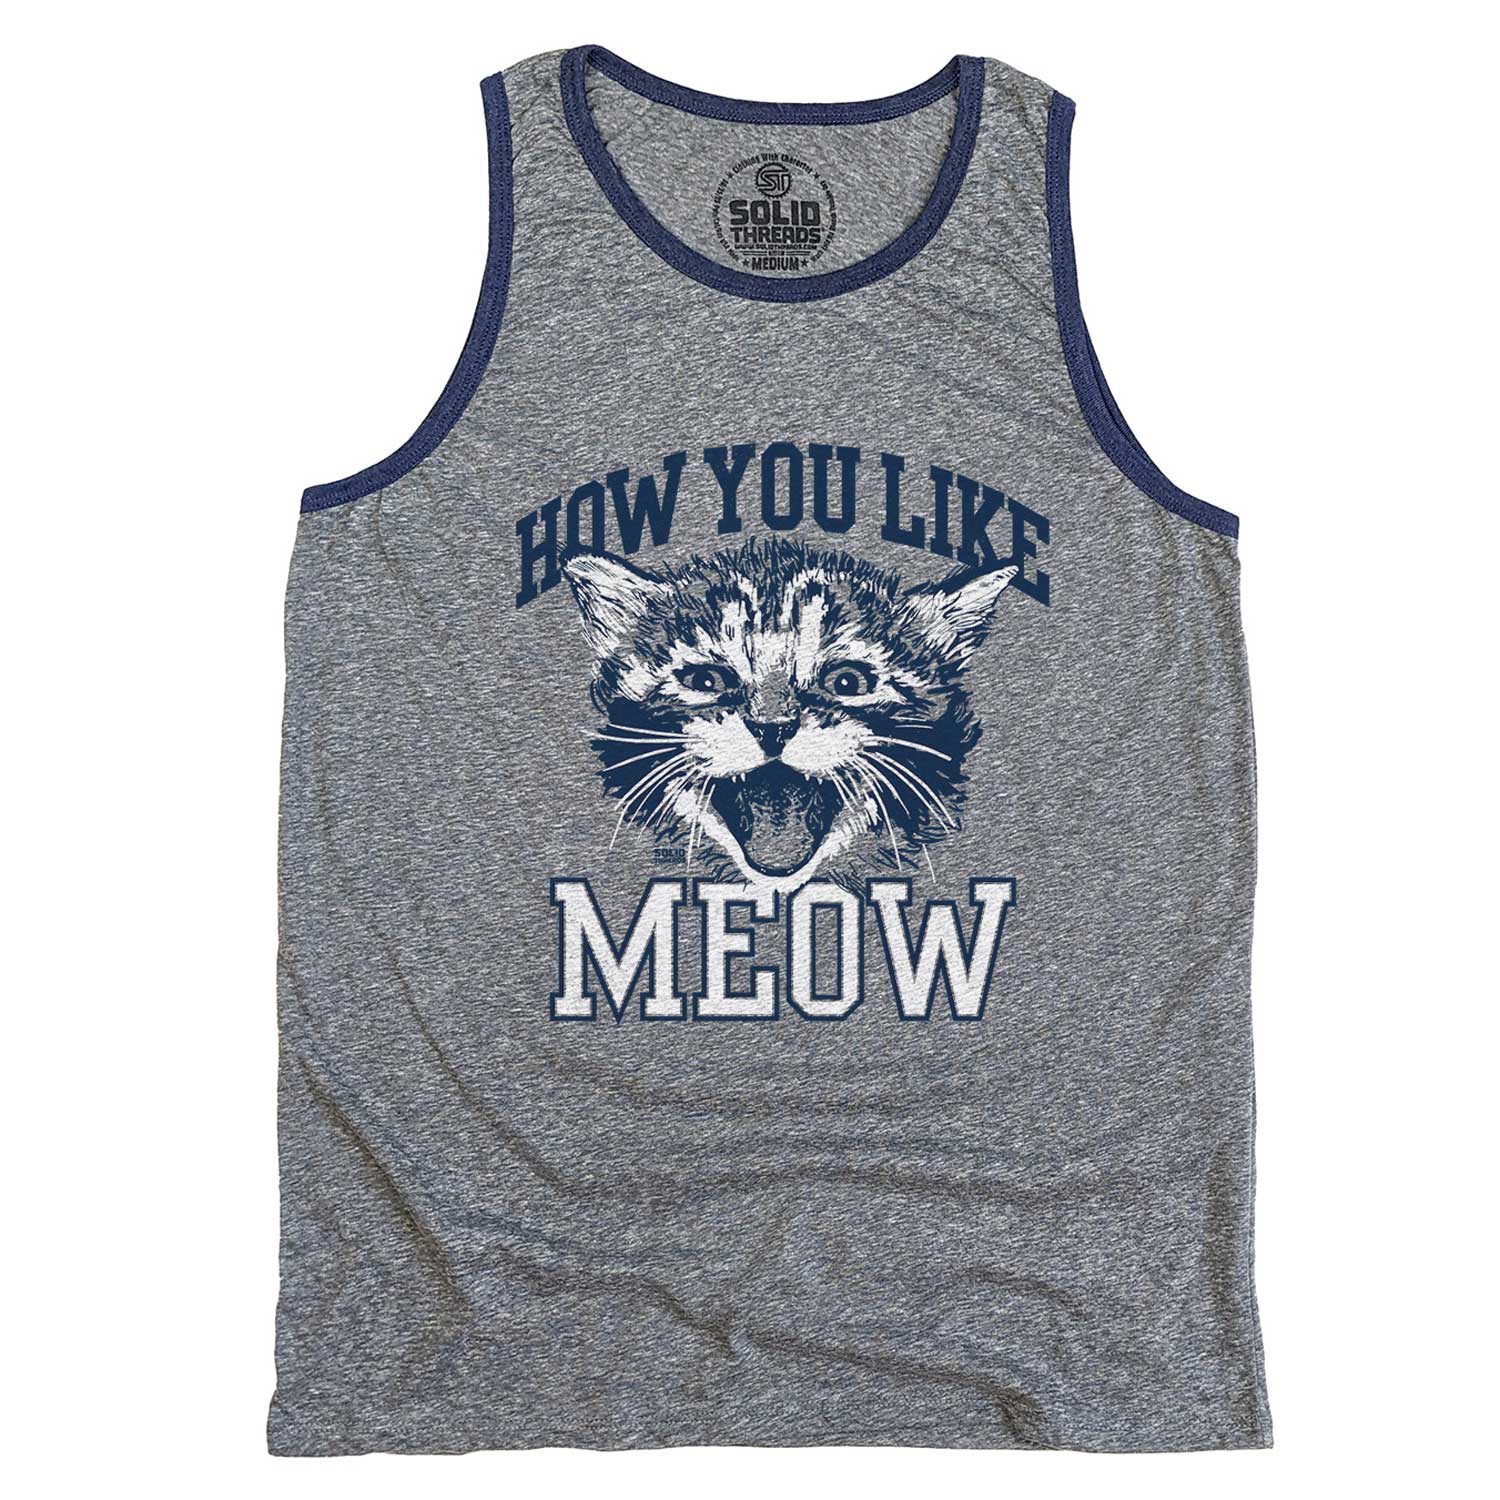 Men's How You Like Meow Vintage Graphic Tank Top | Funny Cat T-shirt | Solid Threads